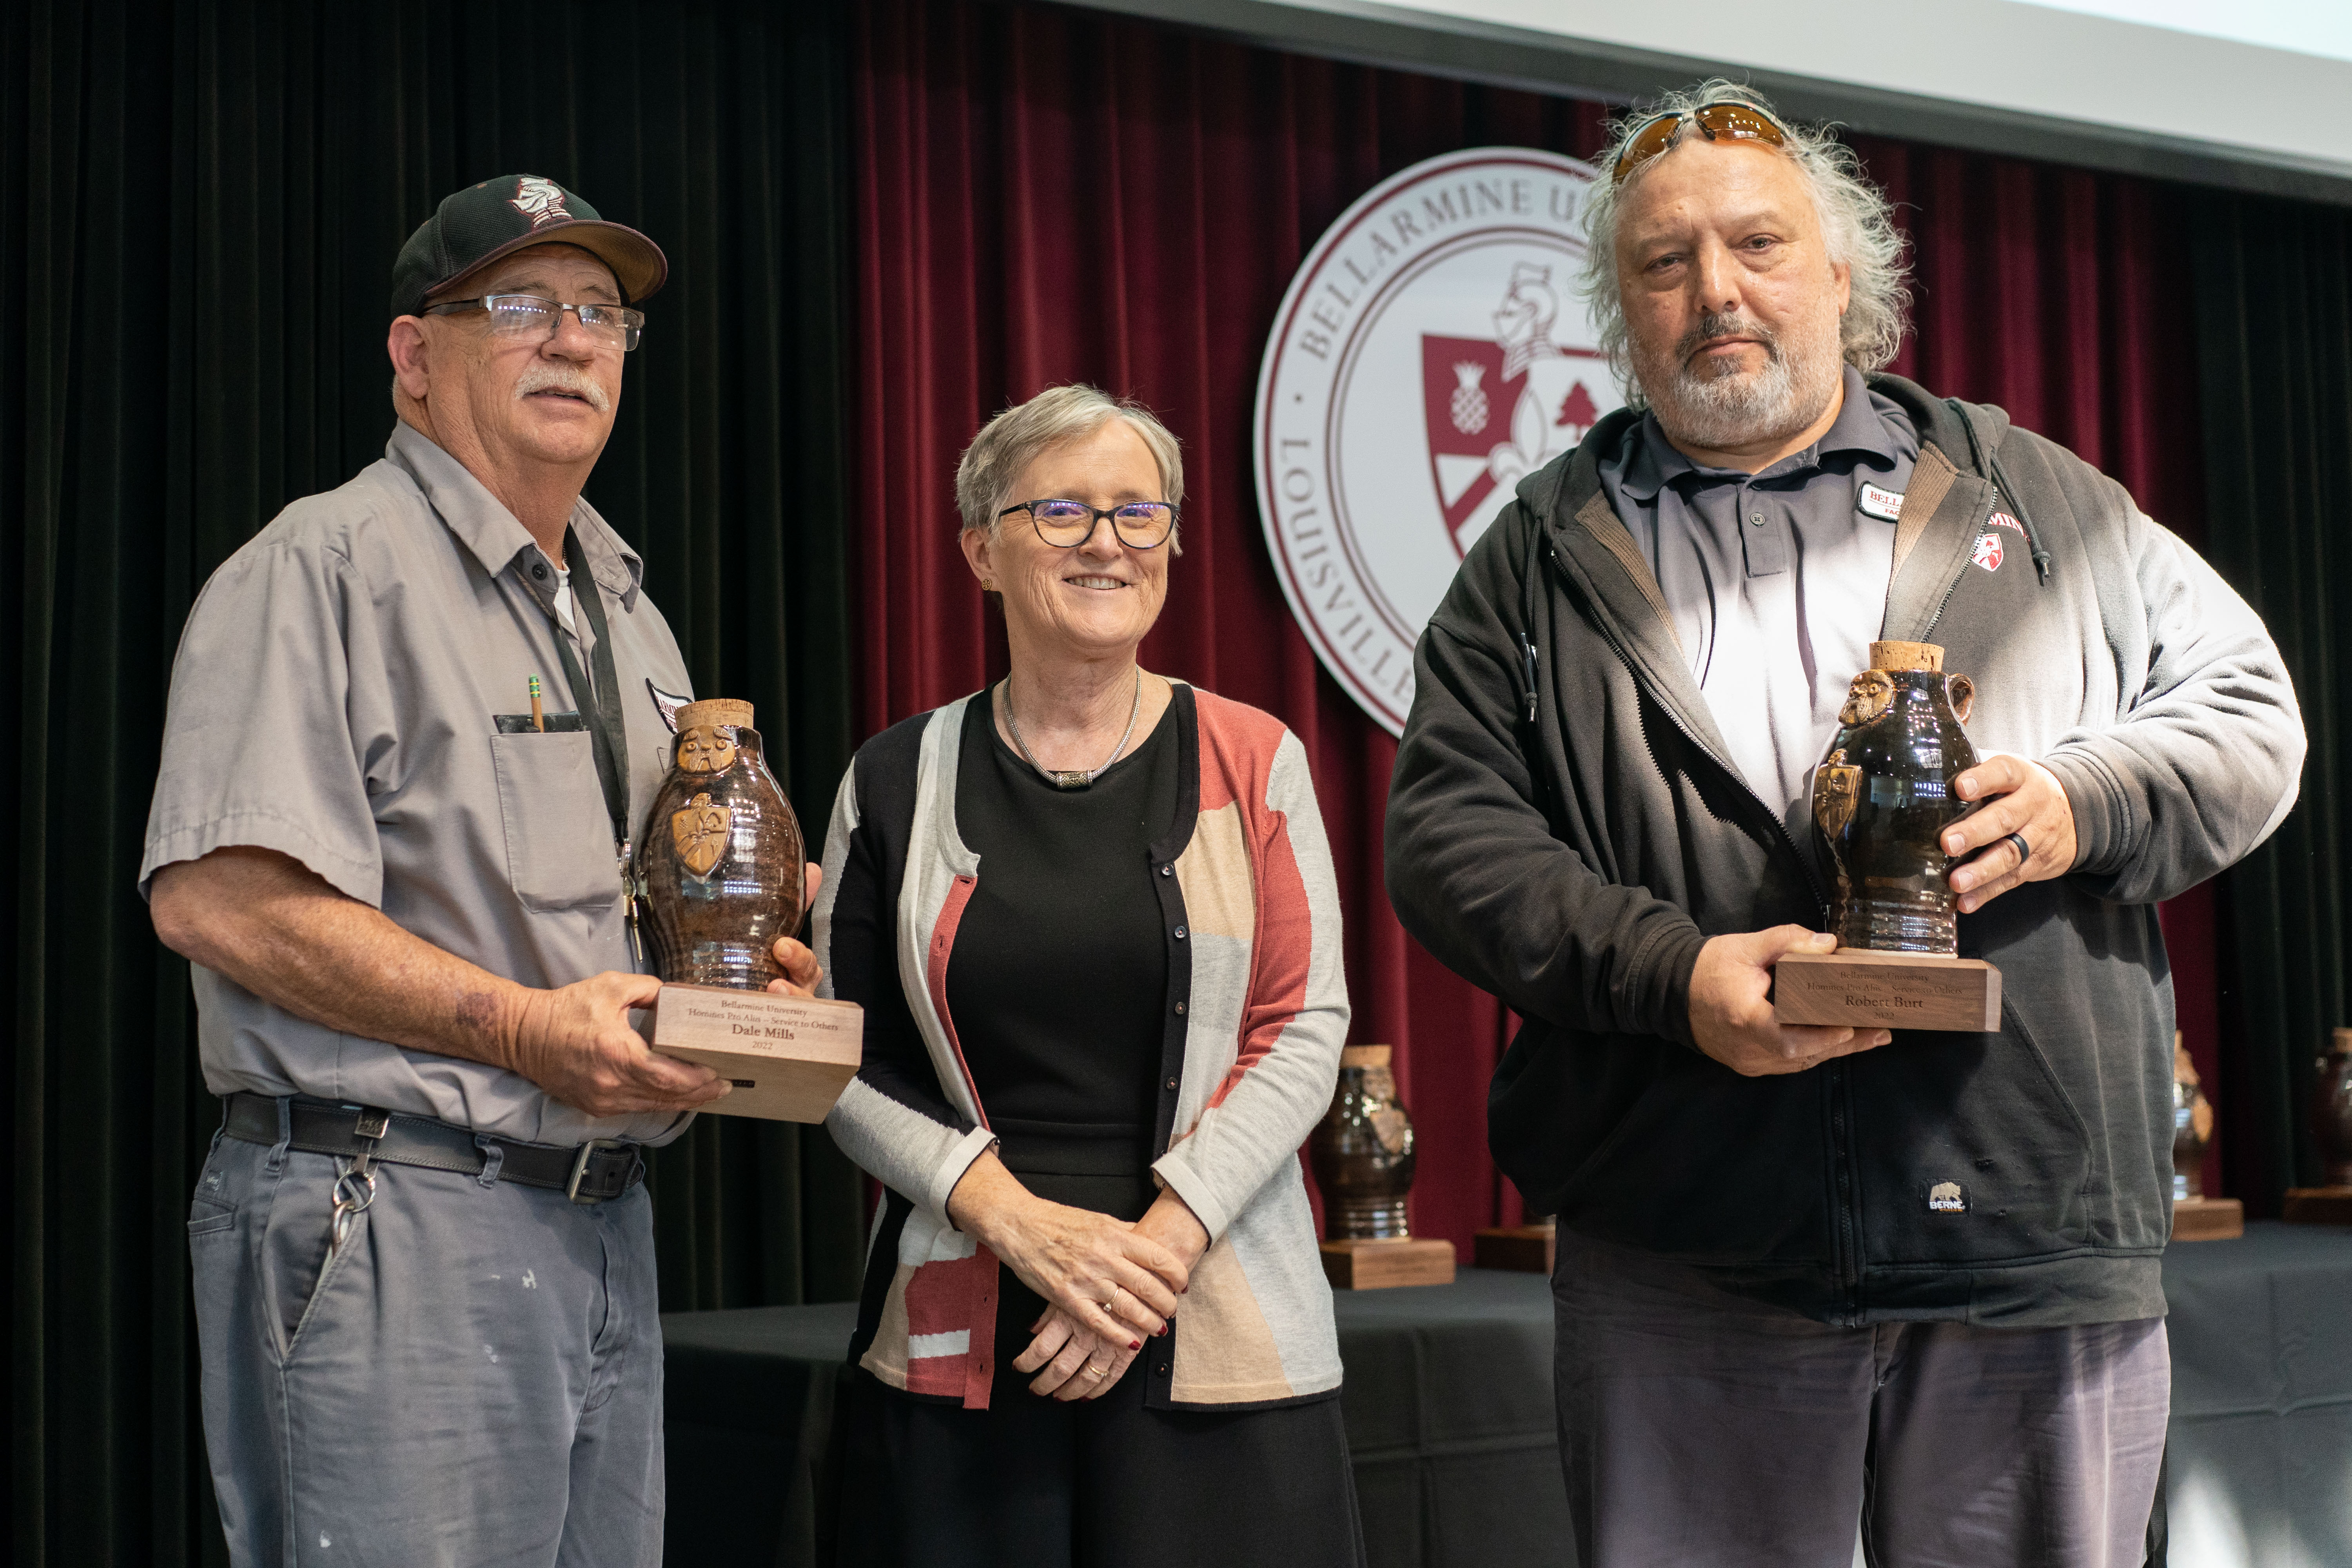 Robert Burt and Dale Mills receive Homines Pro Aliis For Service to Others awards.